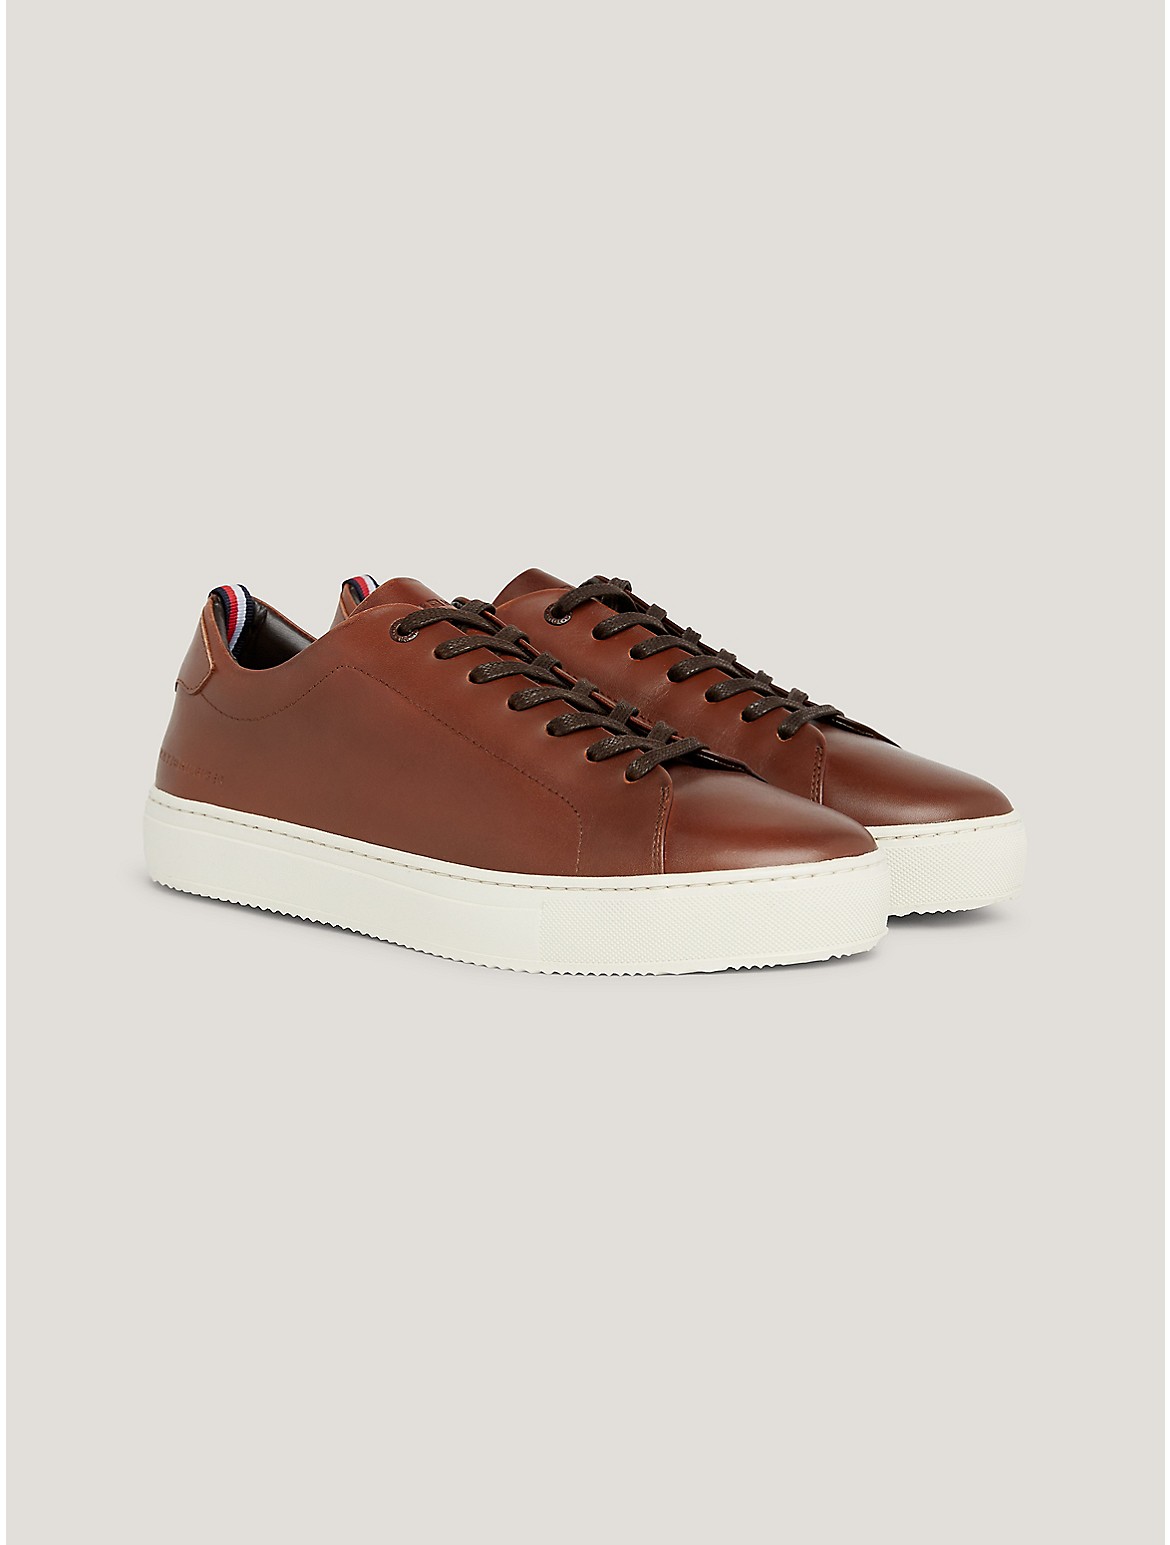 Tommy Hilfiger Premium Leather Sneaker In Natural Cognac